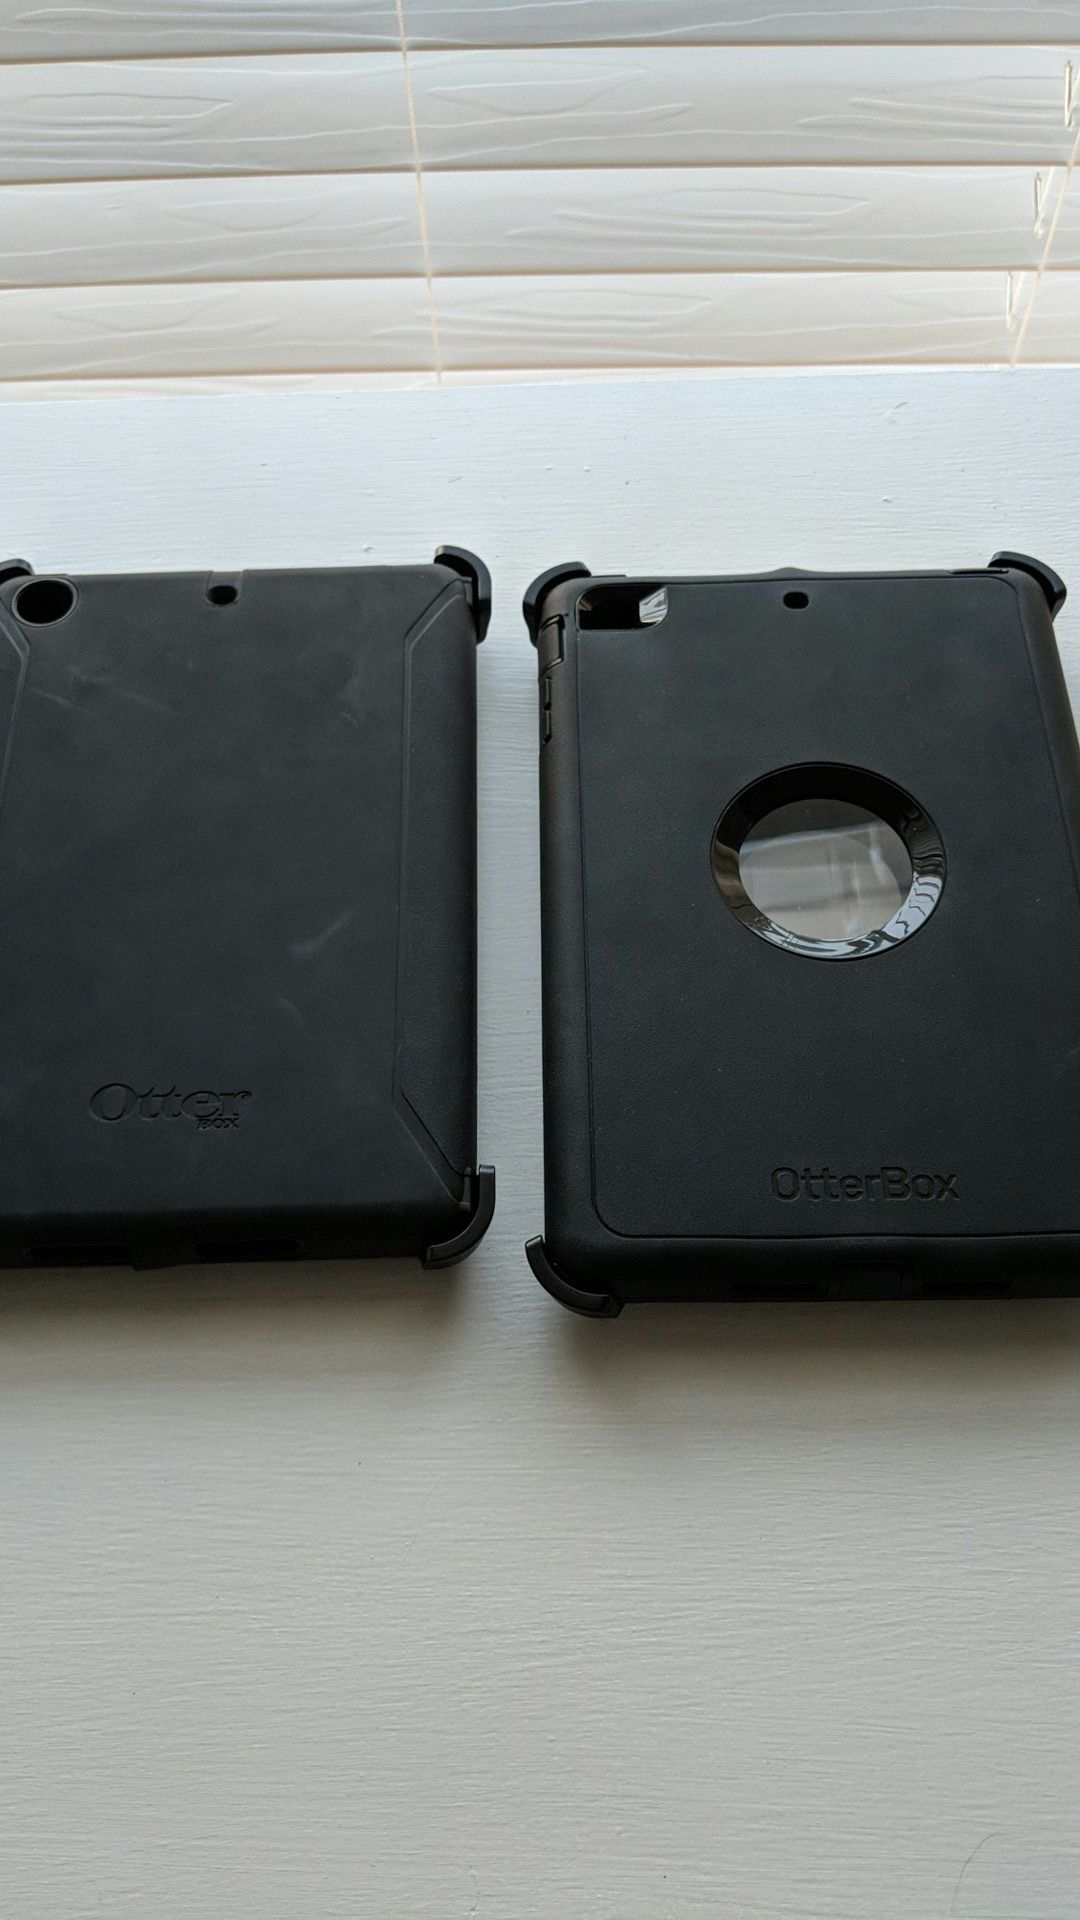 *TWO* iPad mini 2nd or 3rd gen OtterBox cases - like new!